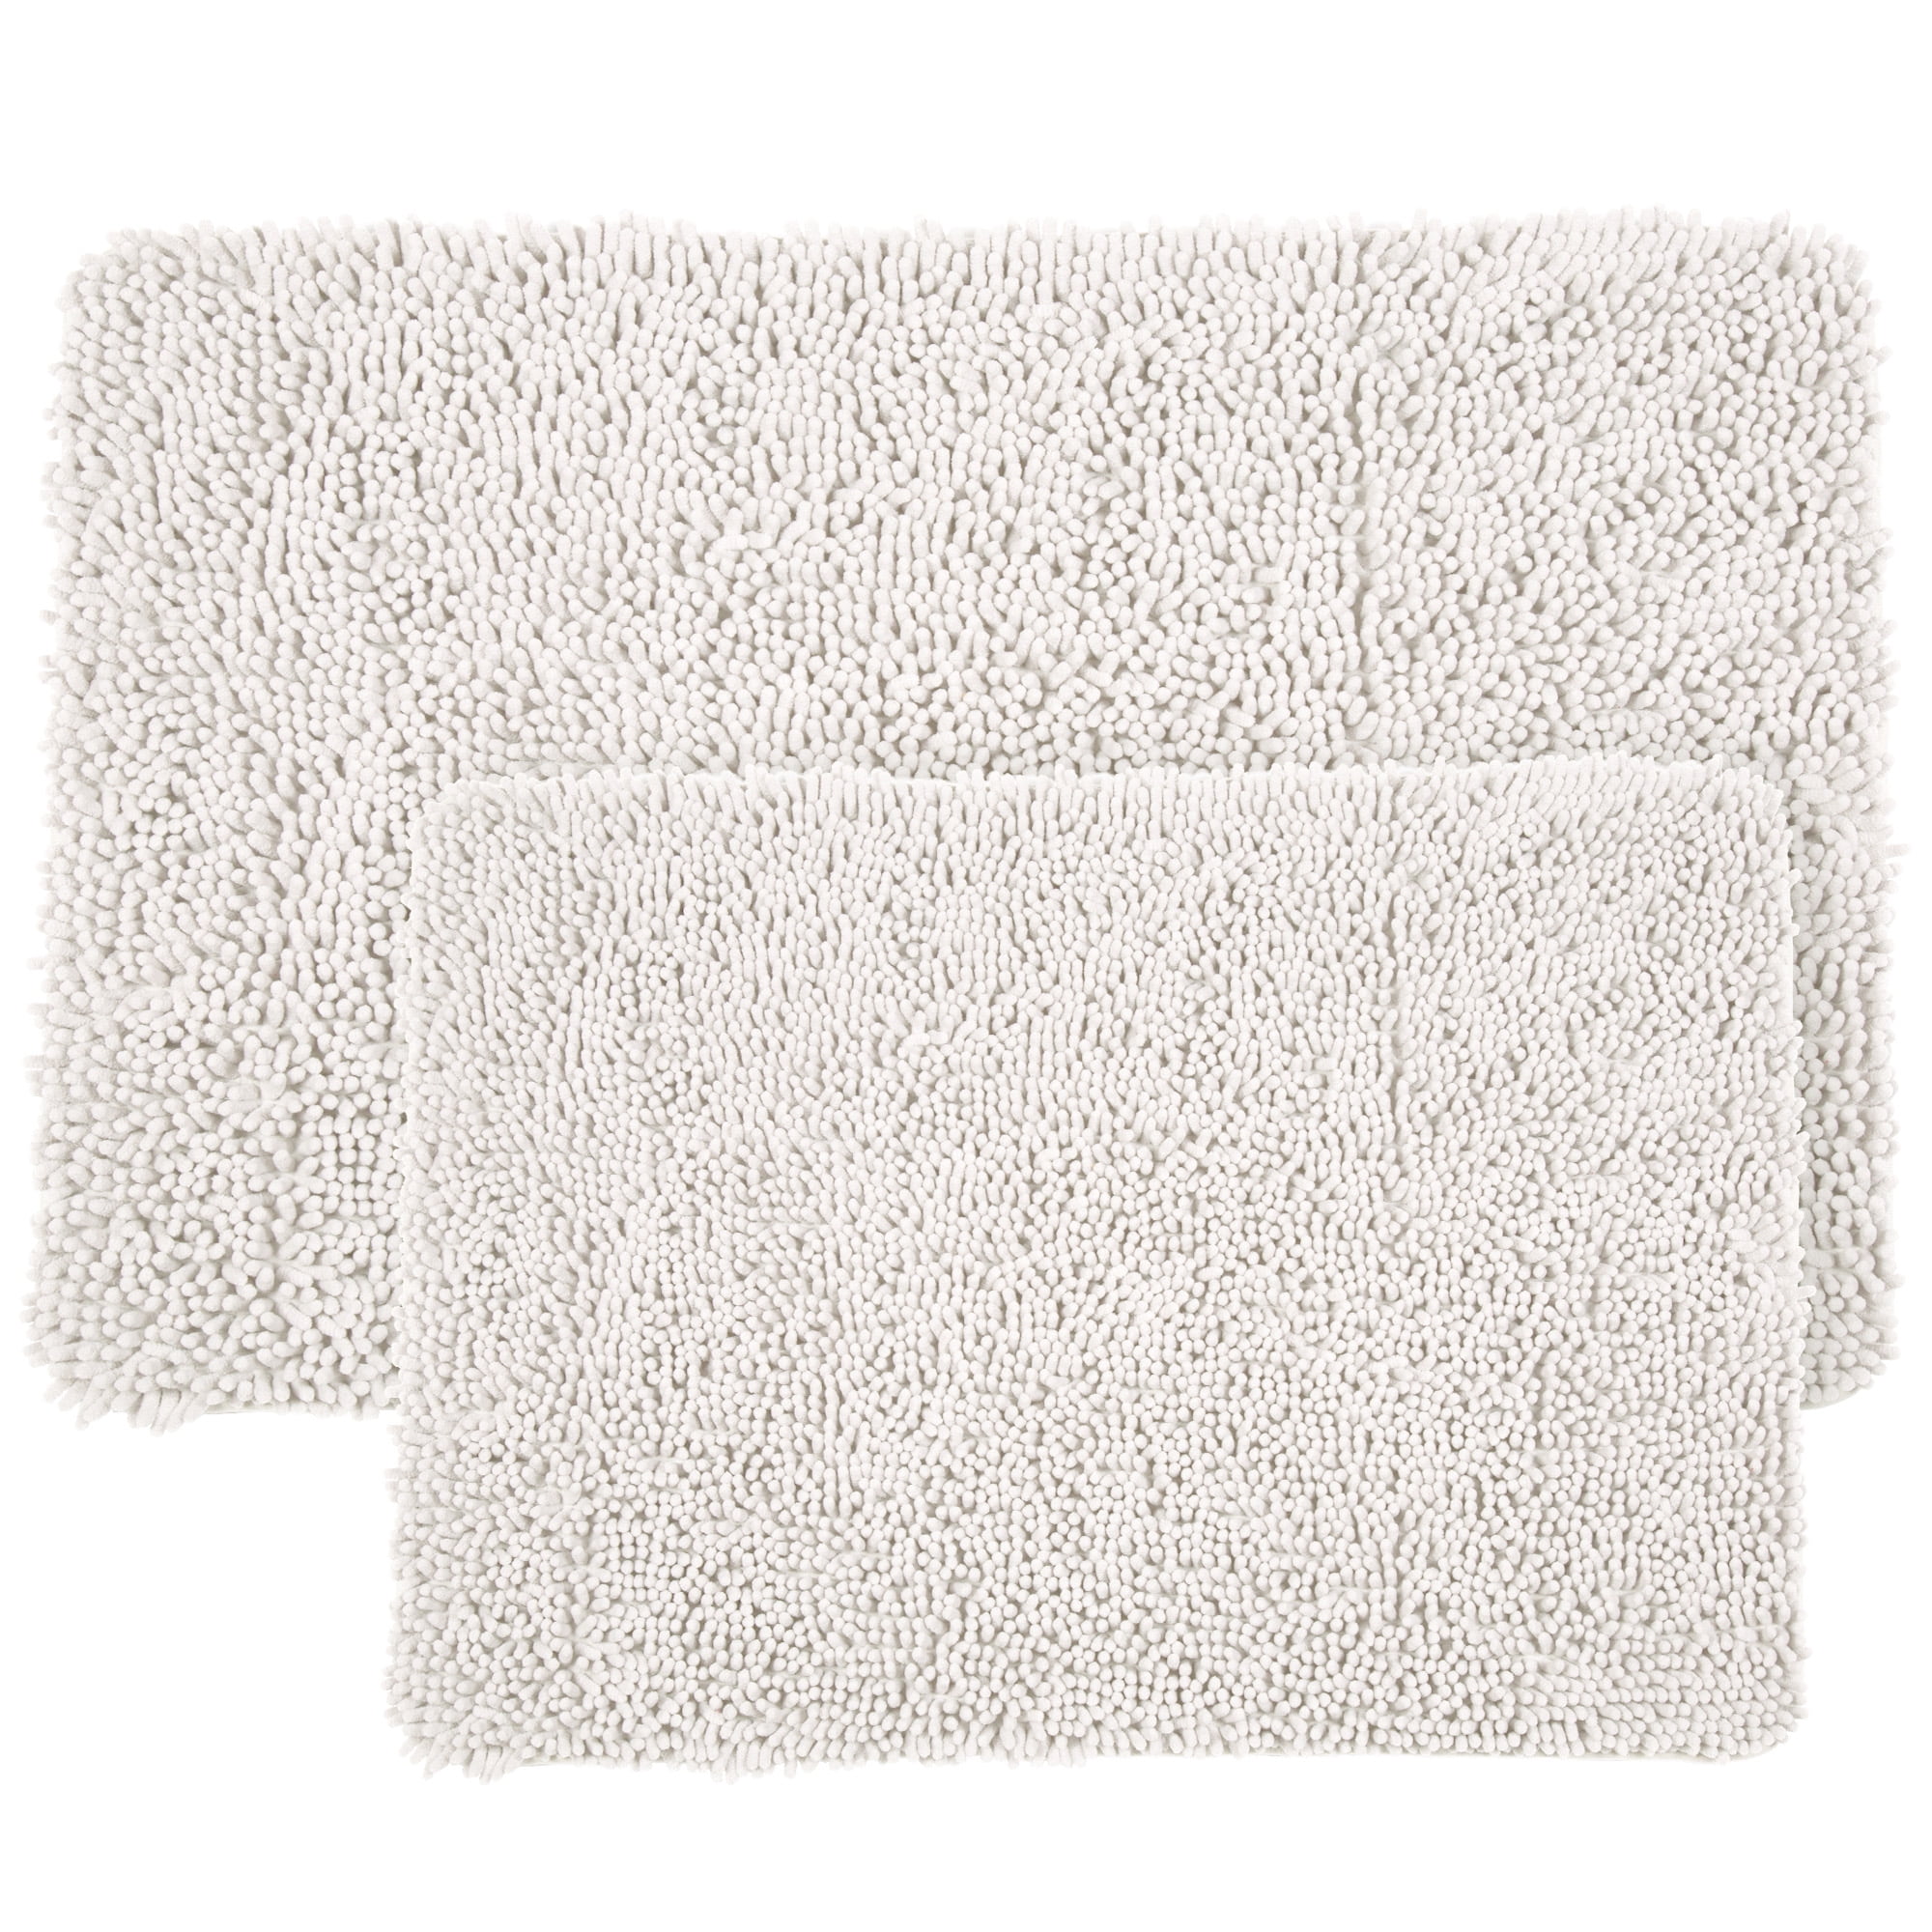 2-piece Bathroom Rug Set – Memory Foam Bath Mats With Plush Chenille Top  And Non-slip Base – Machine Washable Bathroom Rugs By Lavish Home (ivory) :  Target